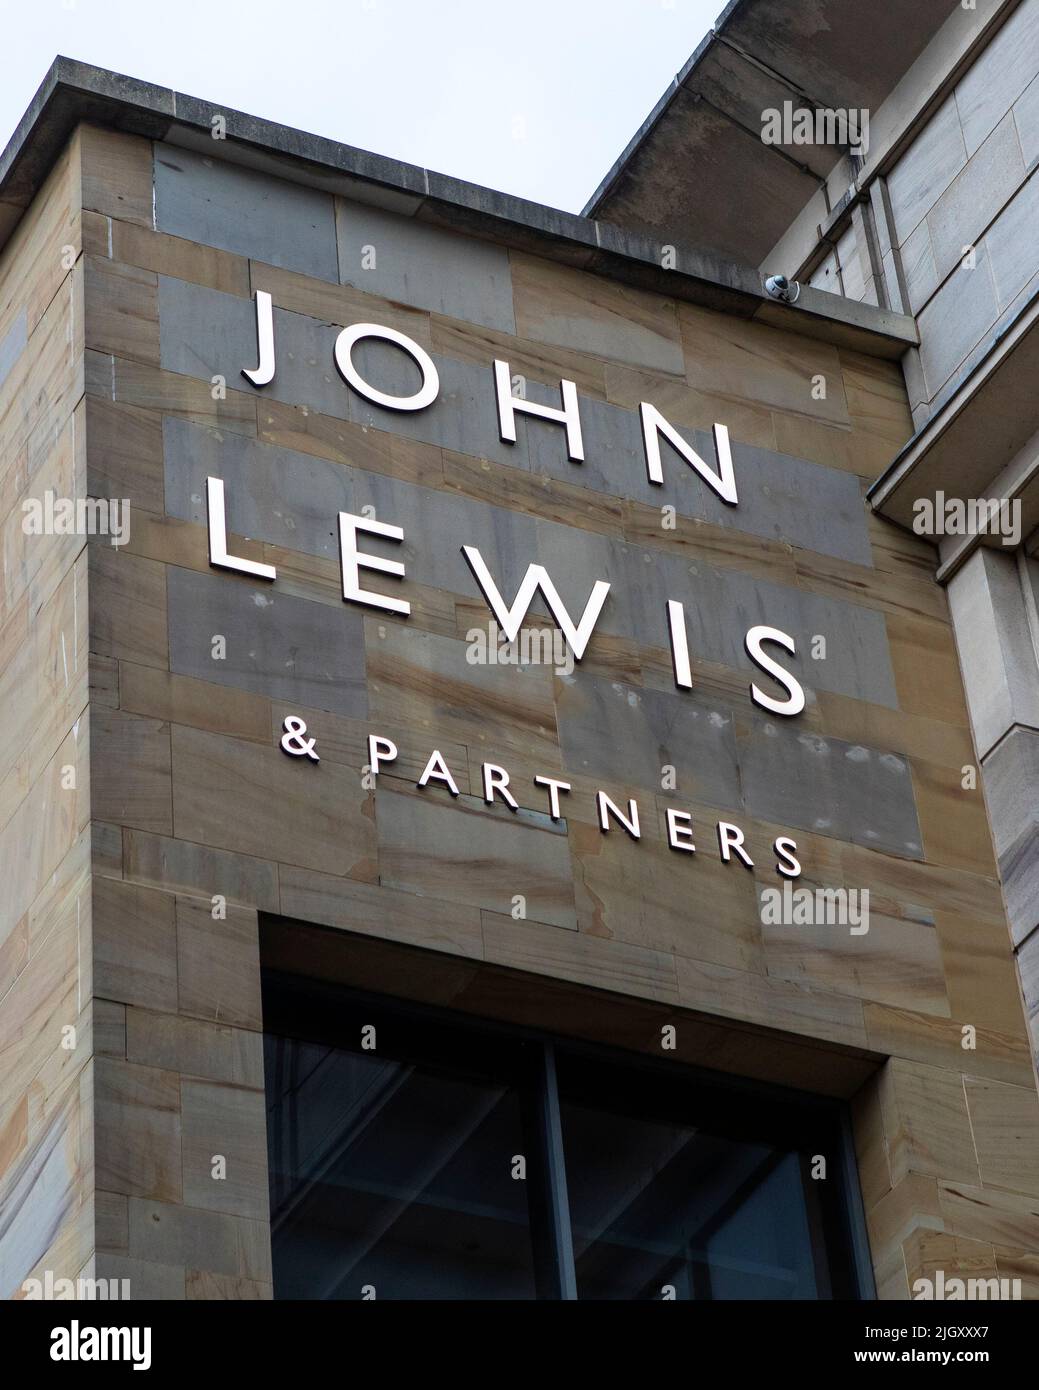 Glasgow, Scotland - October 14th 2021: The John Lewis and Partners logo at the Buchanan Galleries shopping centre in the city of Glasgow, Scotland. Stock Photo